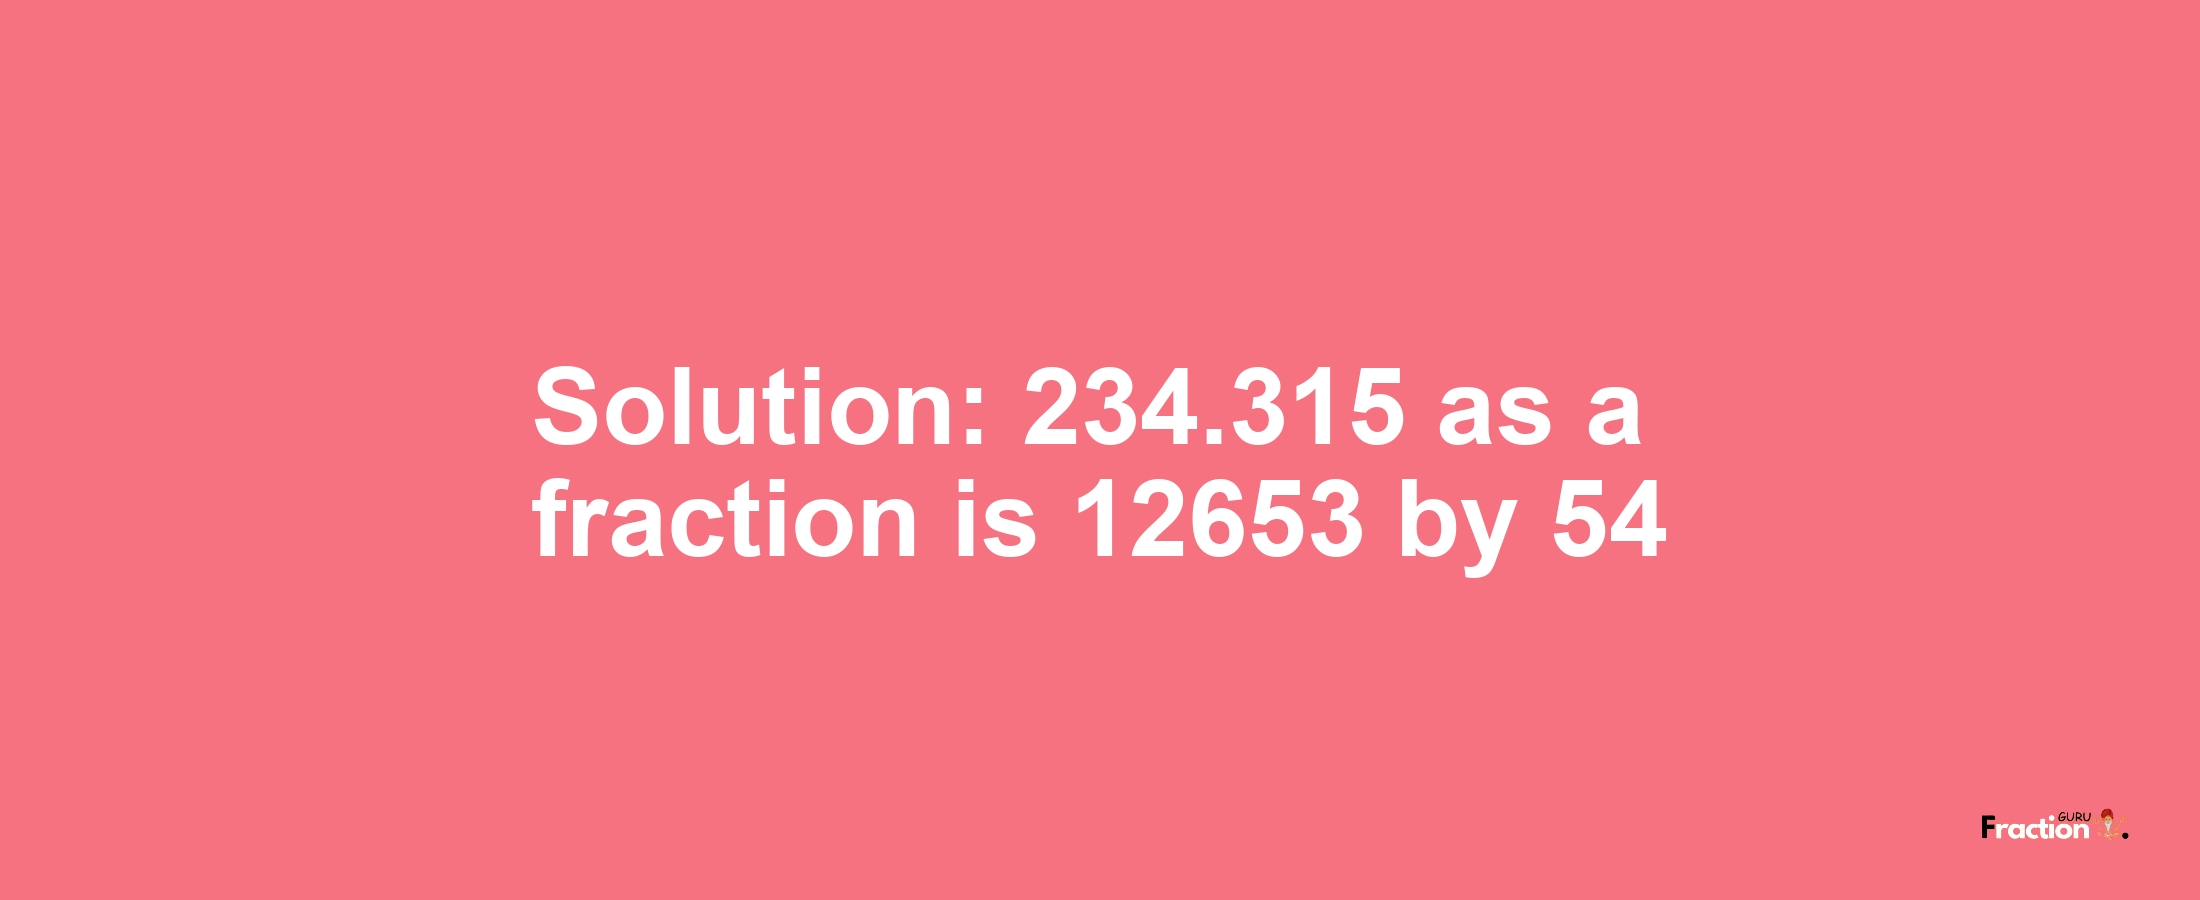 Solution:234.315 as a fraction is 12653/54